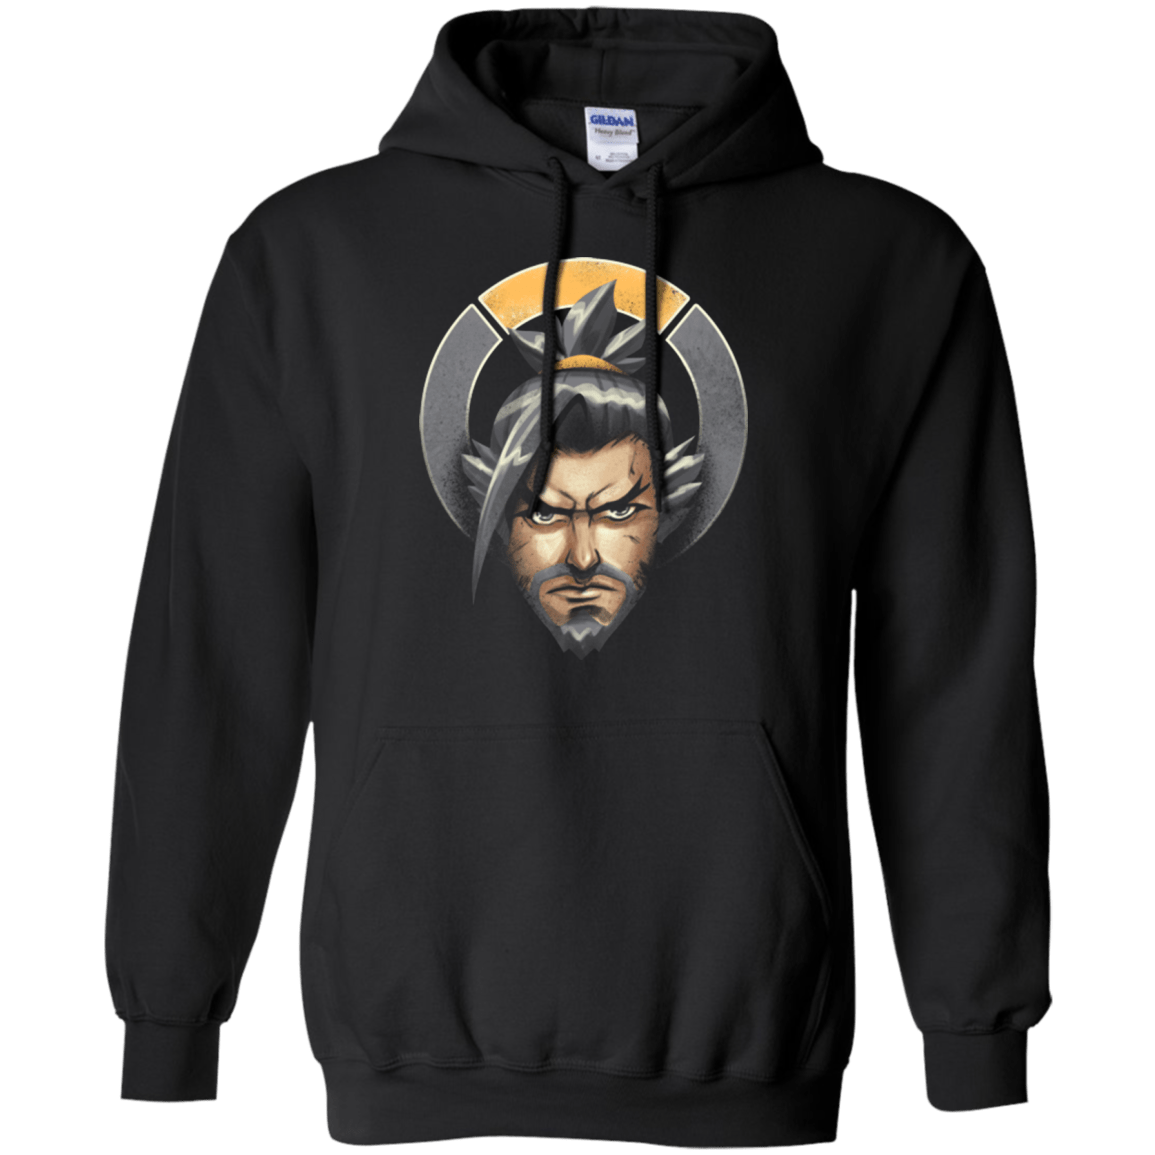 Sweatshirts Black / Small The Bowman Assassin Pullover Hoodie